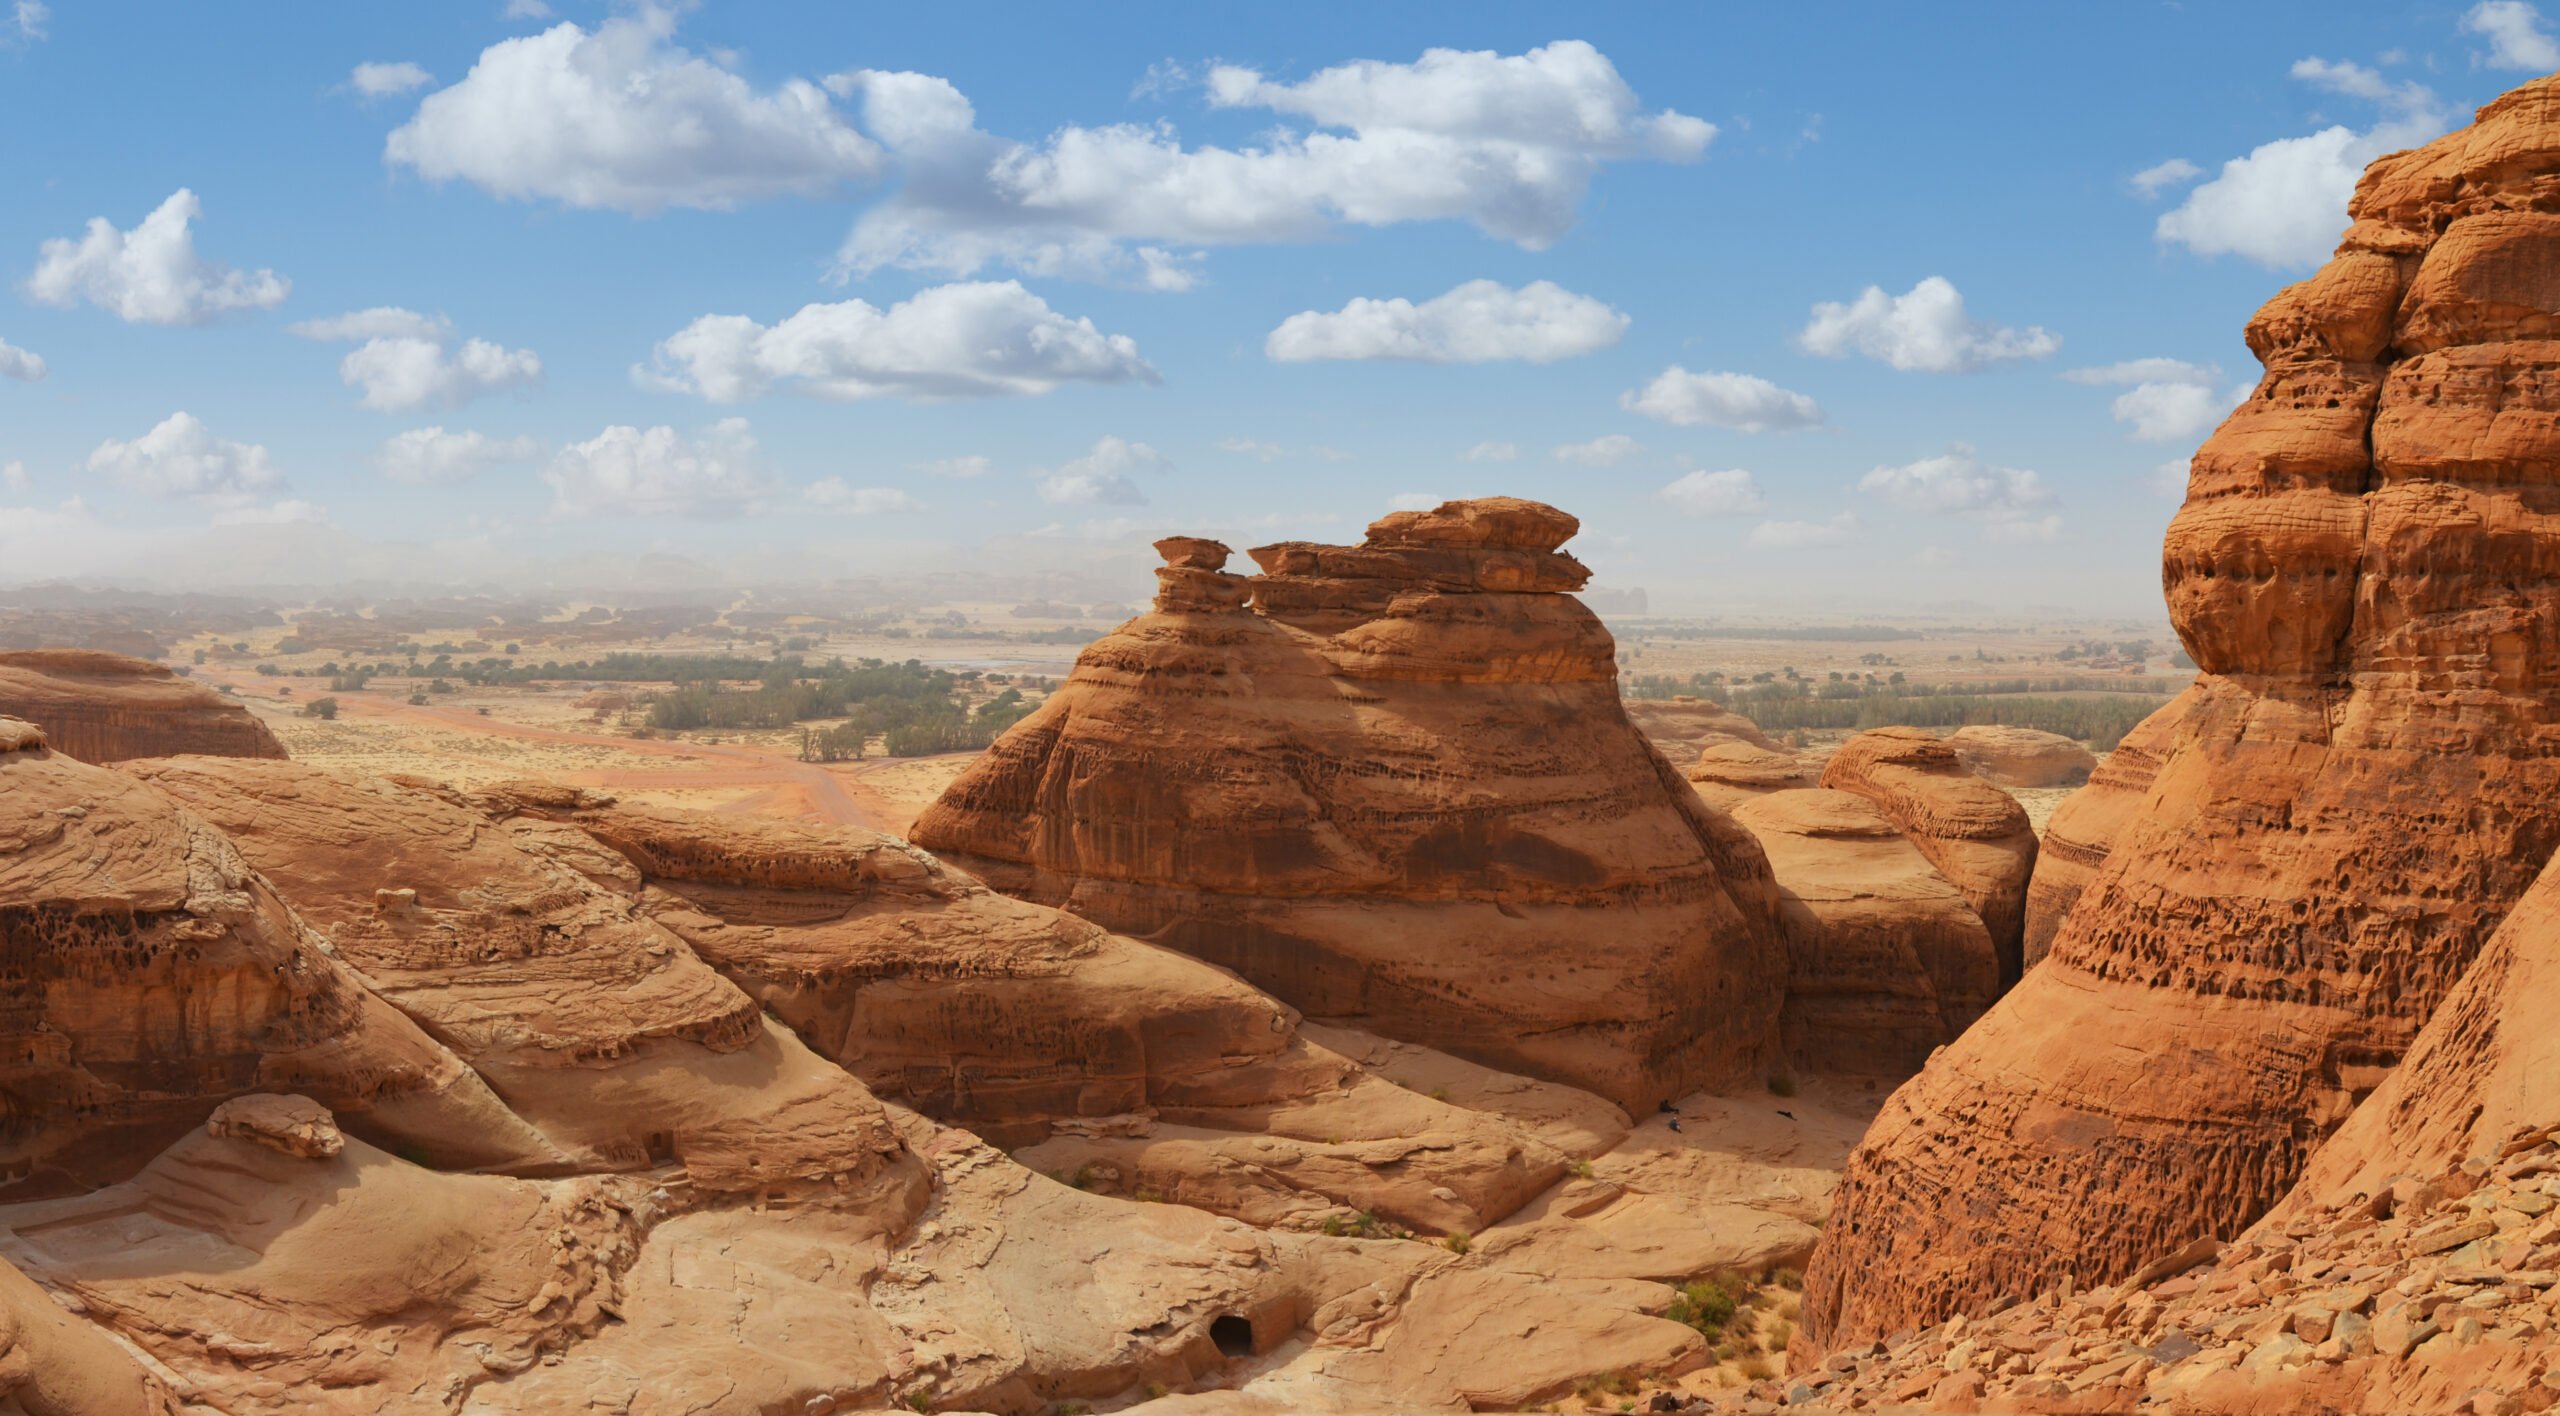 Discover The Beauty Of Alla Desert On The 4 Day Madain Saleh Tour From Eilat